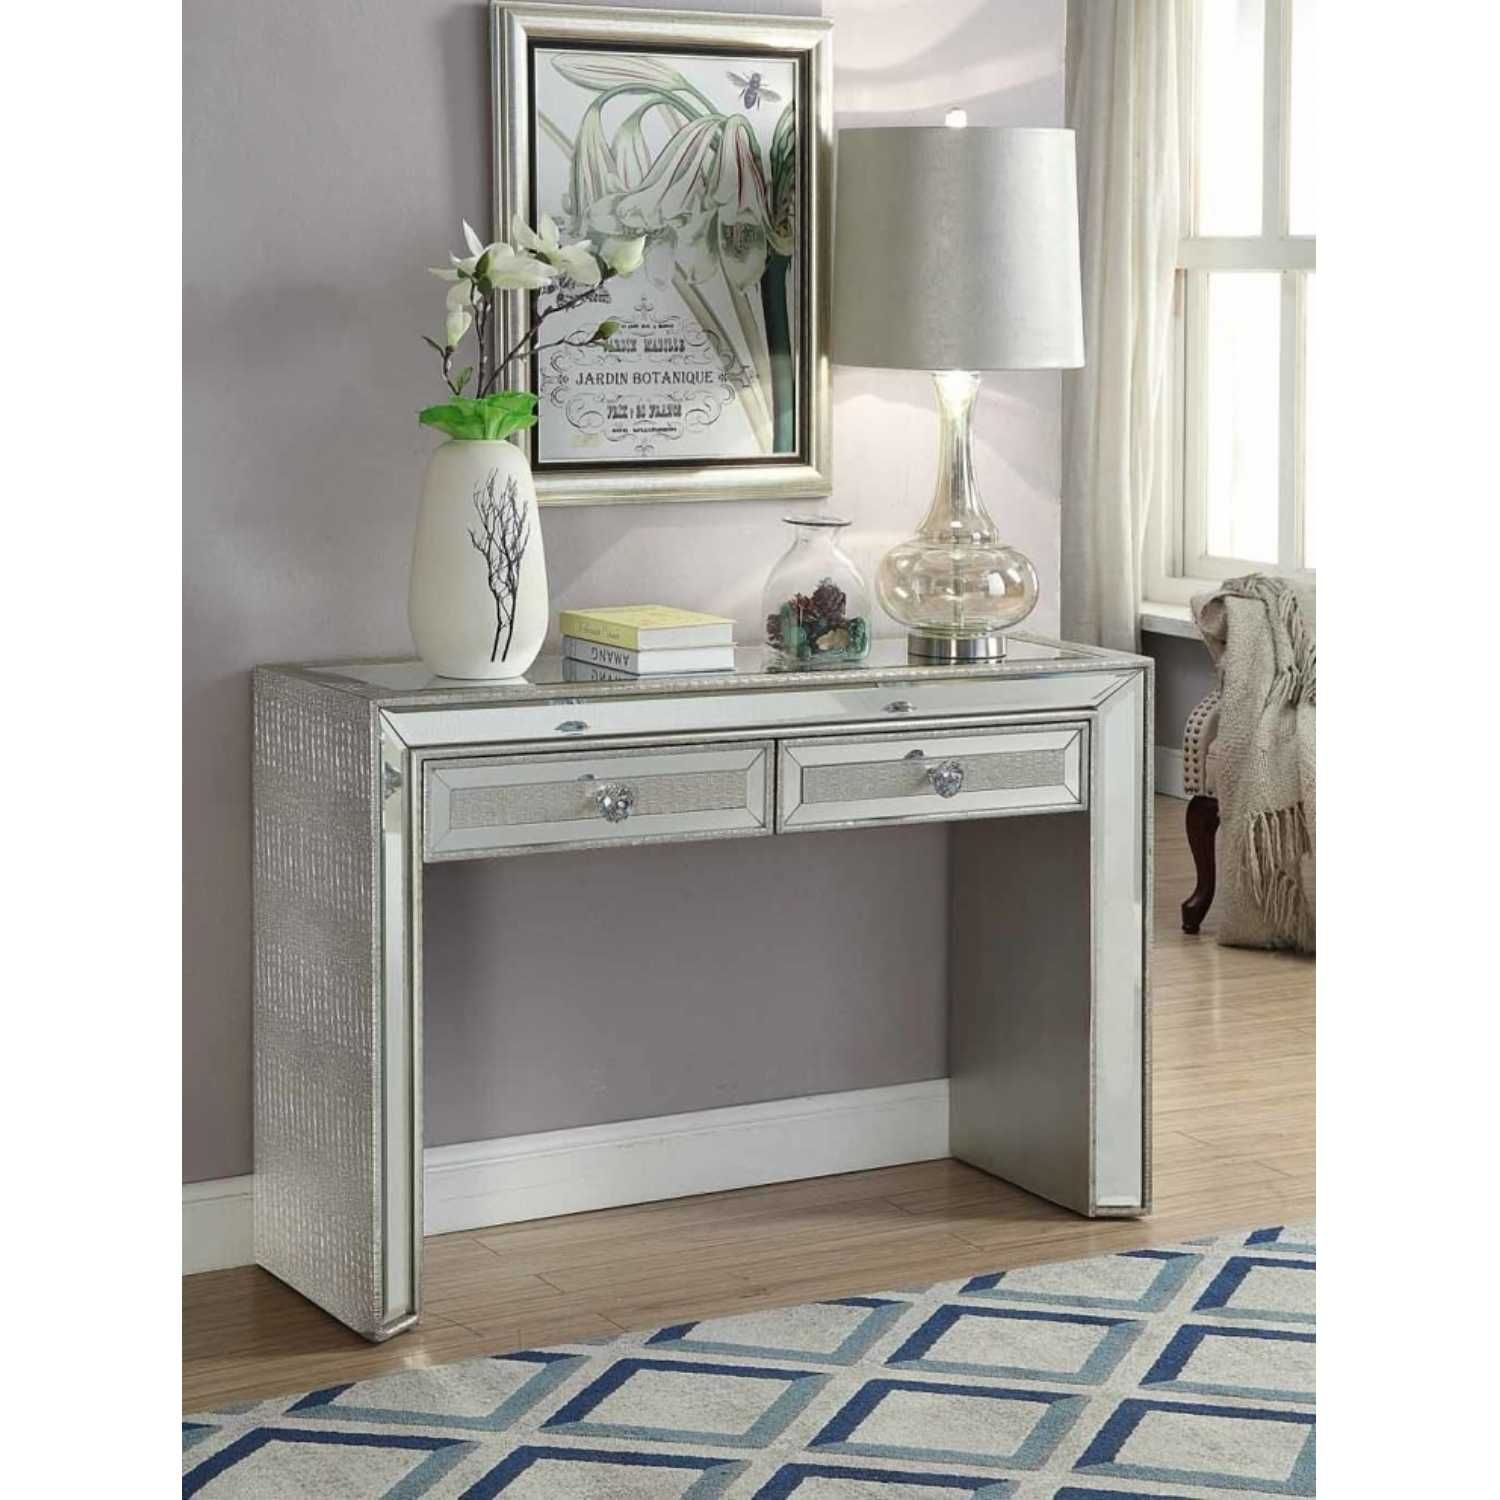 Sofia Modern Mirrored Glass Console Table With 2 Drawers Throughout Glass Console Tables (View 11 of 20)